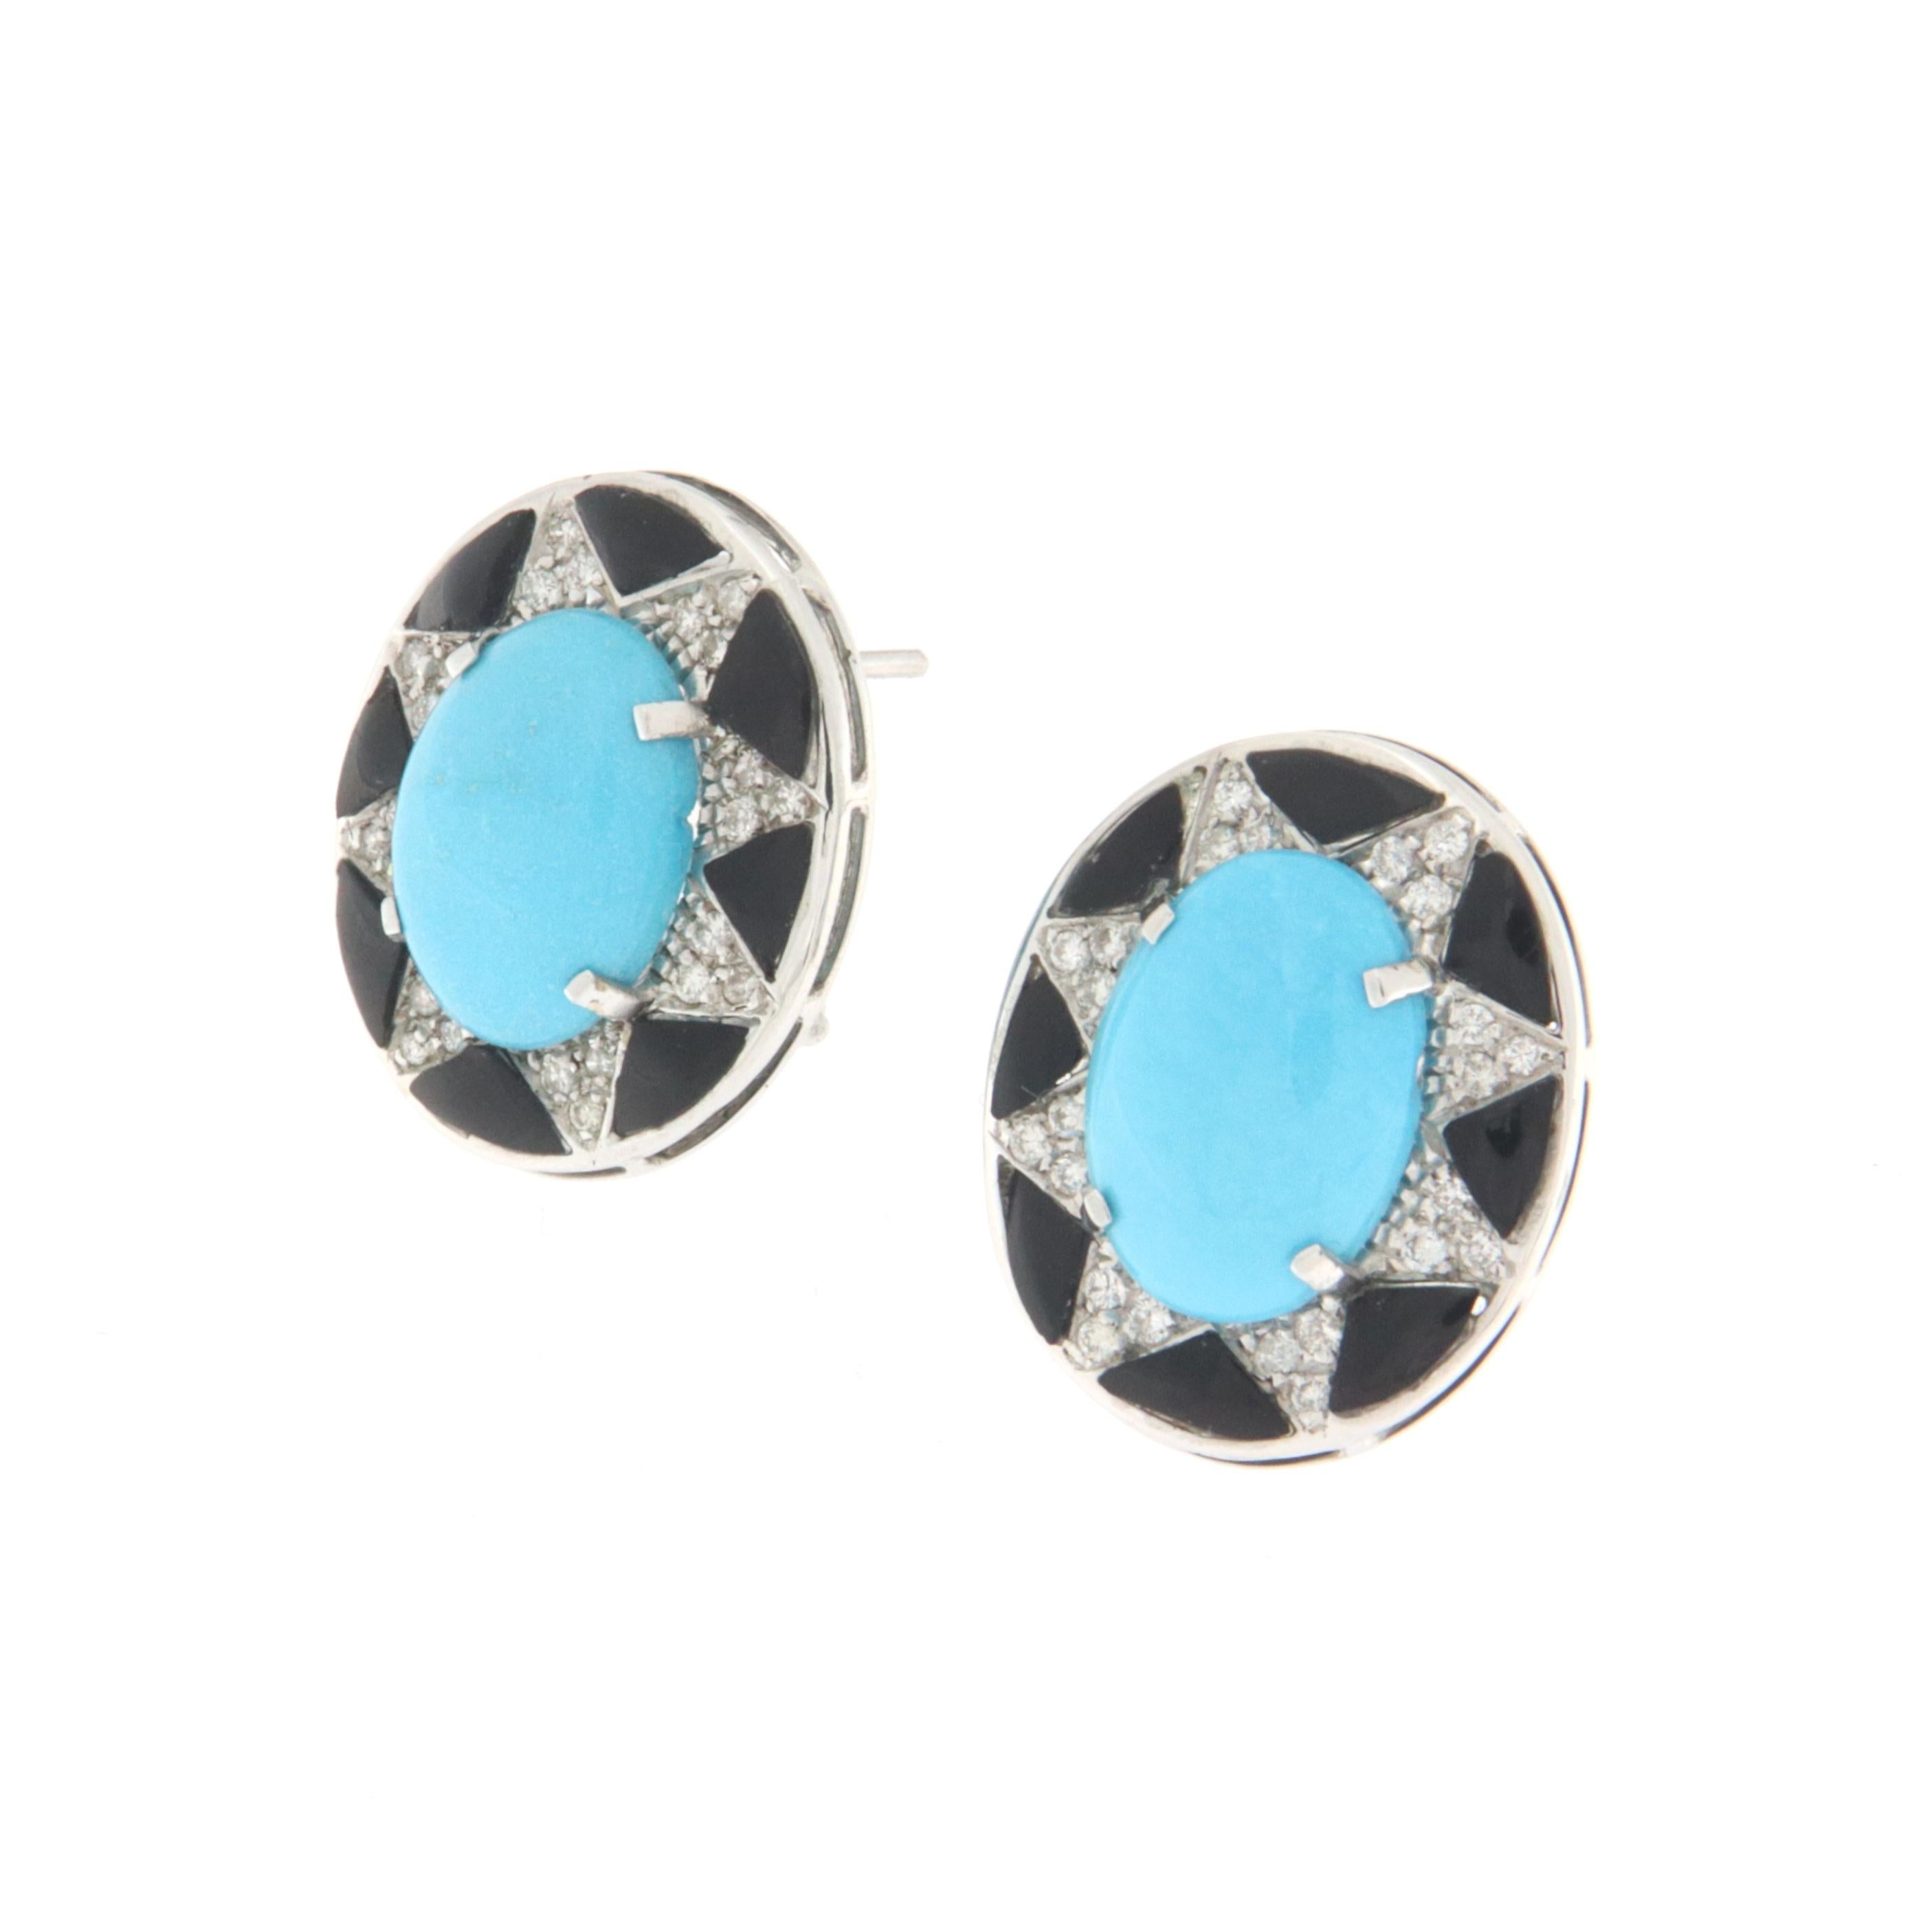 18 Karat white gold stud earrings. Handmade by our craftsmen and assembled with onyx, turquoise and diamonds.

Diamonds weight 0.40 karat
Turquoise weight 1.60 grams
Earrings total weight 10 grams
